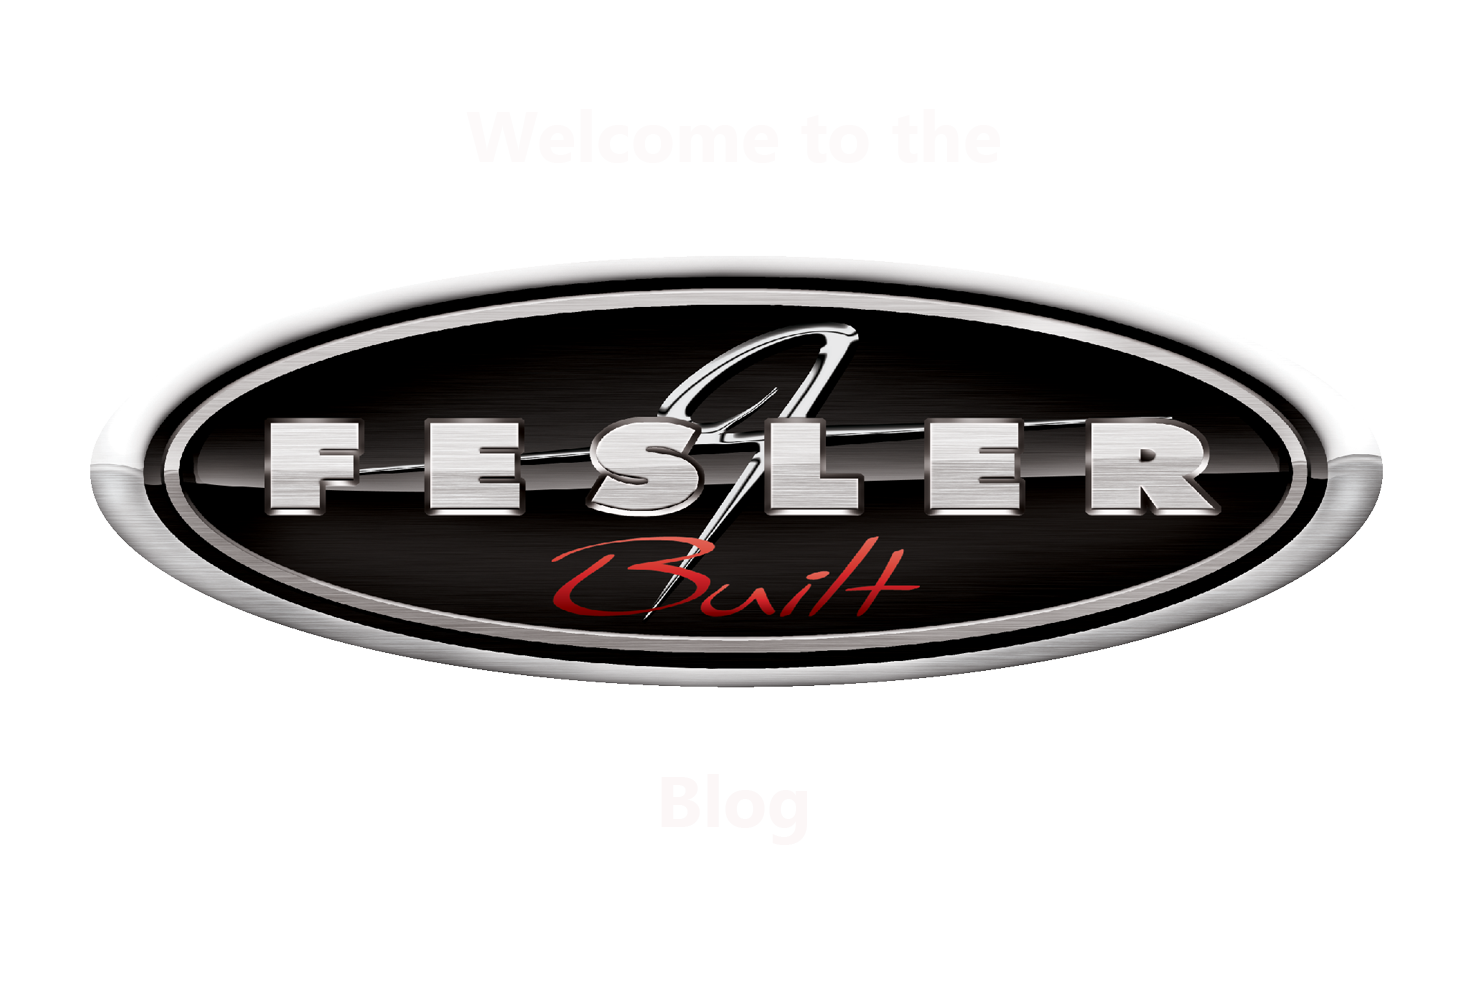 The Fesler Built Blog - where things get real fast!